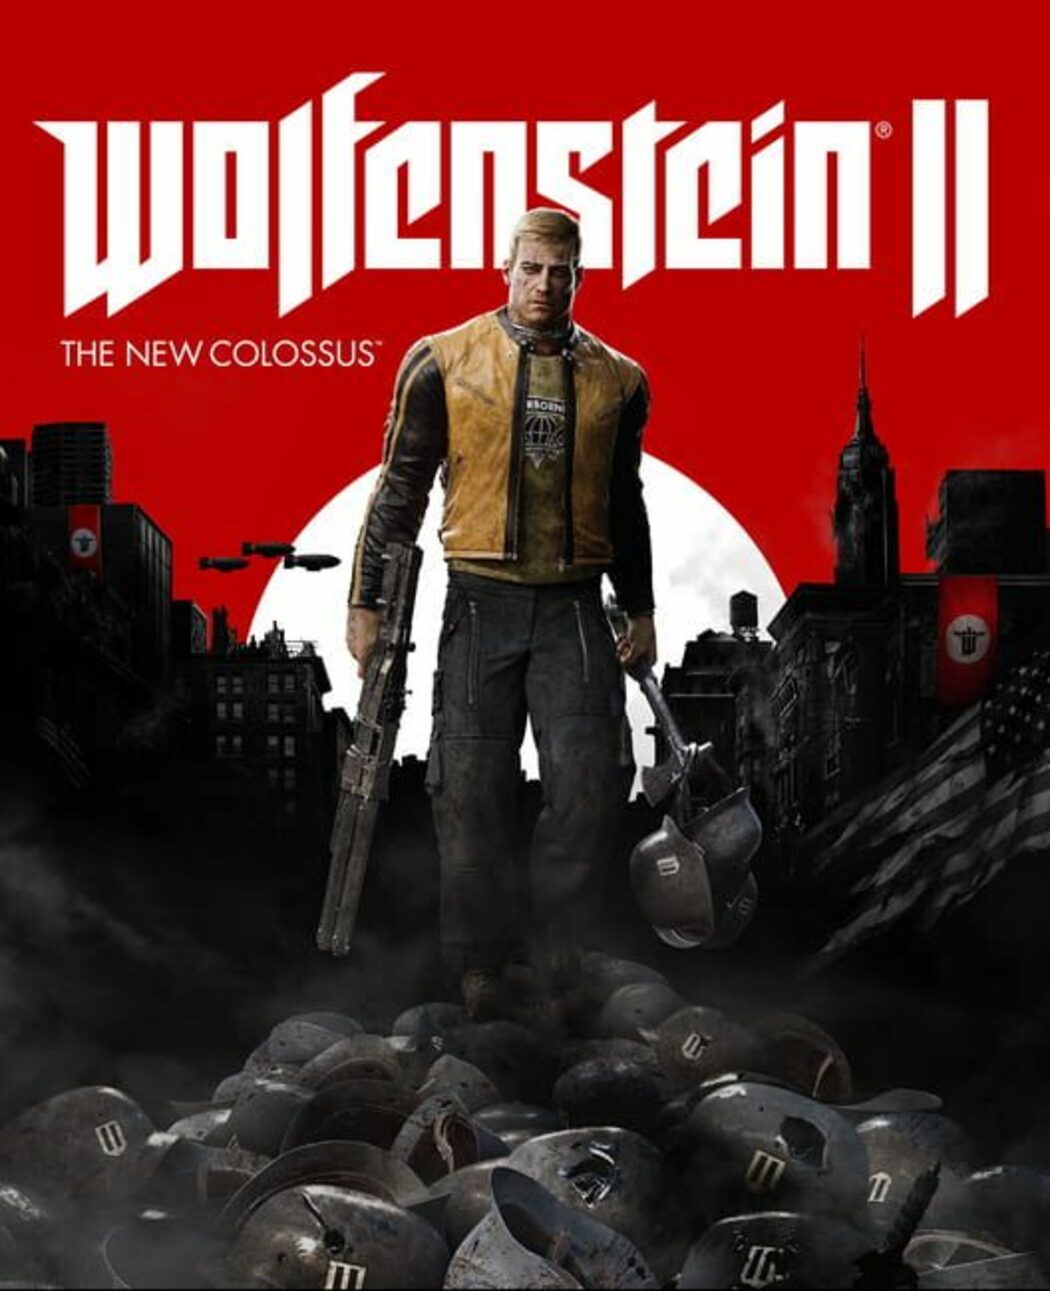 Buy Wolfenstein: The New Order Uncut PC Game